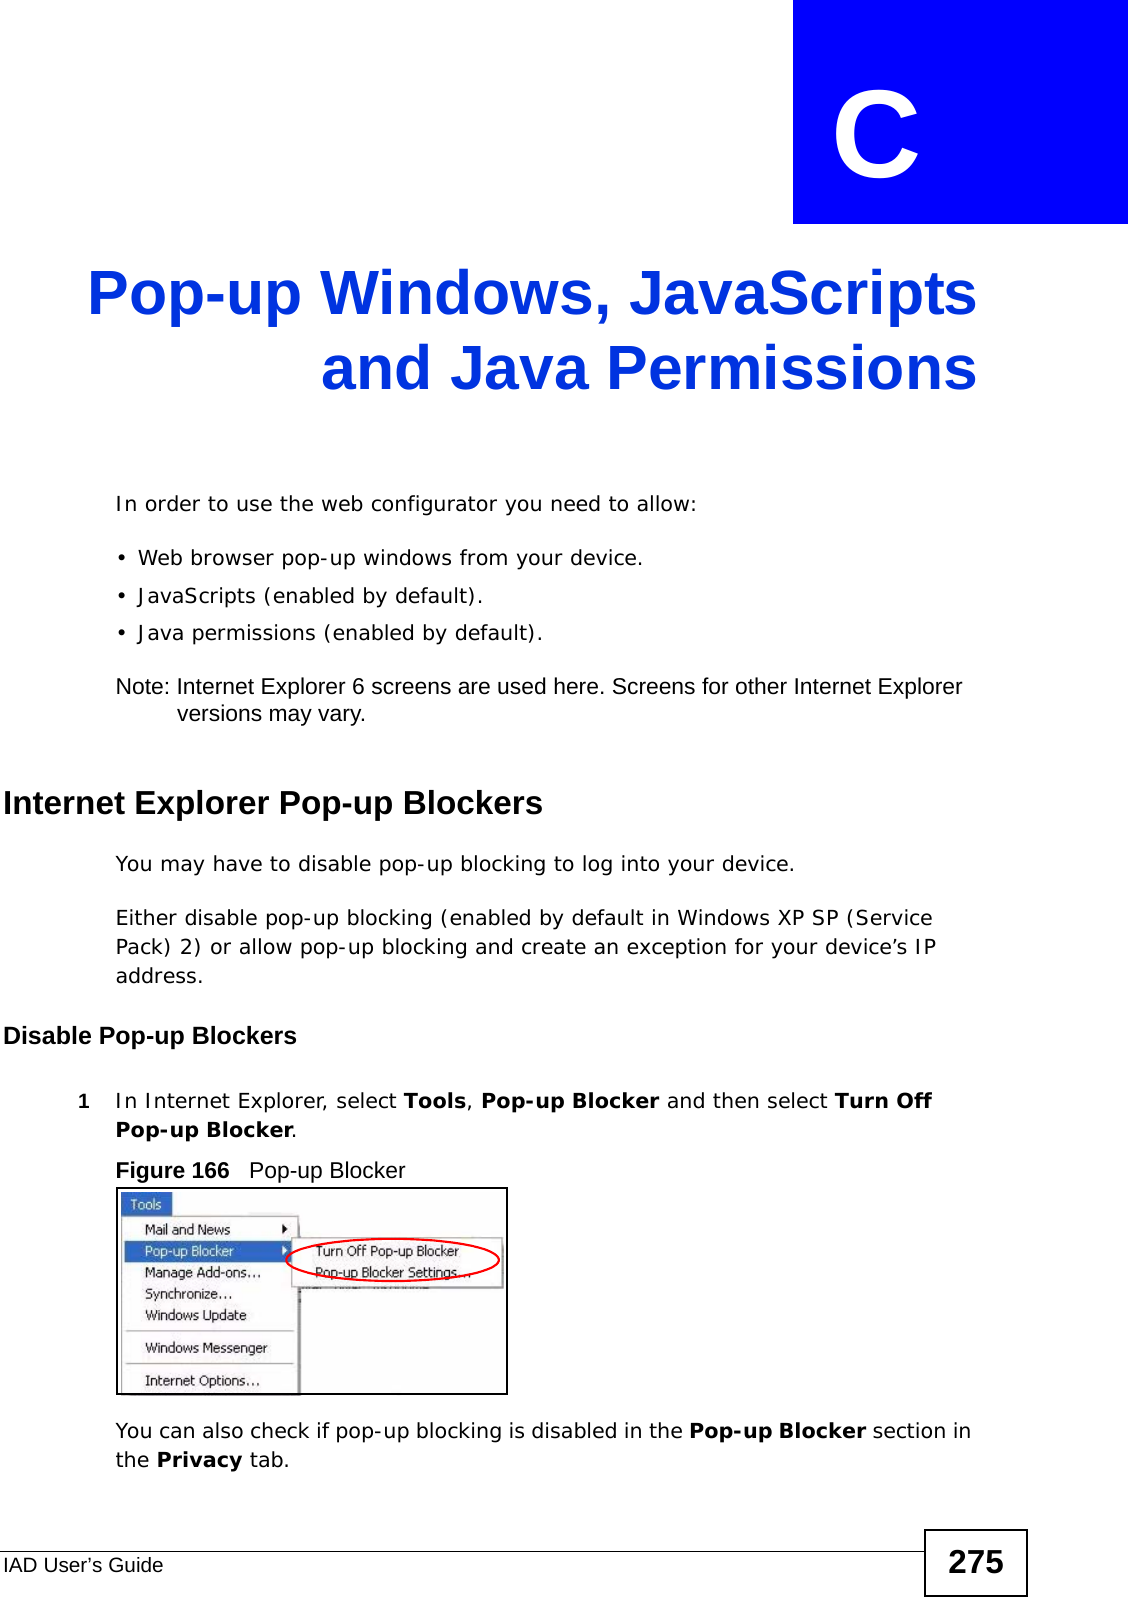 IAD User’s Guide 275APPENDIX  C Pop-up Windows, JavaScriptsand Java PermissionsIn order to use the web configurator you need to allow:• Web browser pop-up windows from your device.• JavaScripts (enabled by default).• Java permissions (enabled by default).Note: Internet Explorer 6 screens are used here. Screens for other Internet Explorer versions may vary.Internet Explorer Pop-up BlockersYou may have to disable pop-up blocking to log into your device. Either disable pop-up blocking (enabled by default in Windows XP SP (Service Pack) 2) or allow pop-up blocking and create an exception for your device’s IP address.Disable Pop-up Blockers1In Internet Explorer, select Tools, Pop-up Blocker and then select Turn Off Pop-up Blocker. Figure 166   Pop-up BlockerYou can also check if pop-up blocking is disabled in the Pop-up Blocker section in the Privacy tab. 